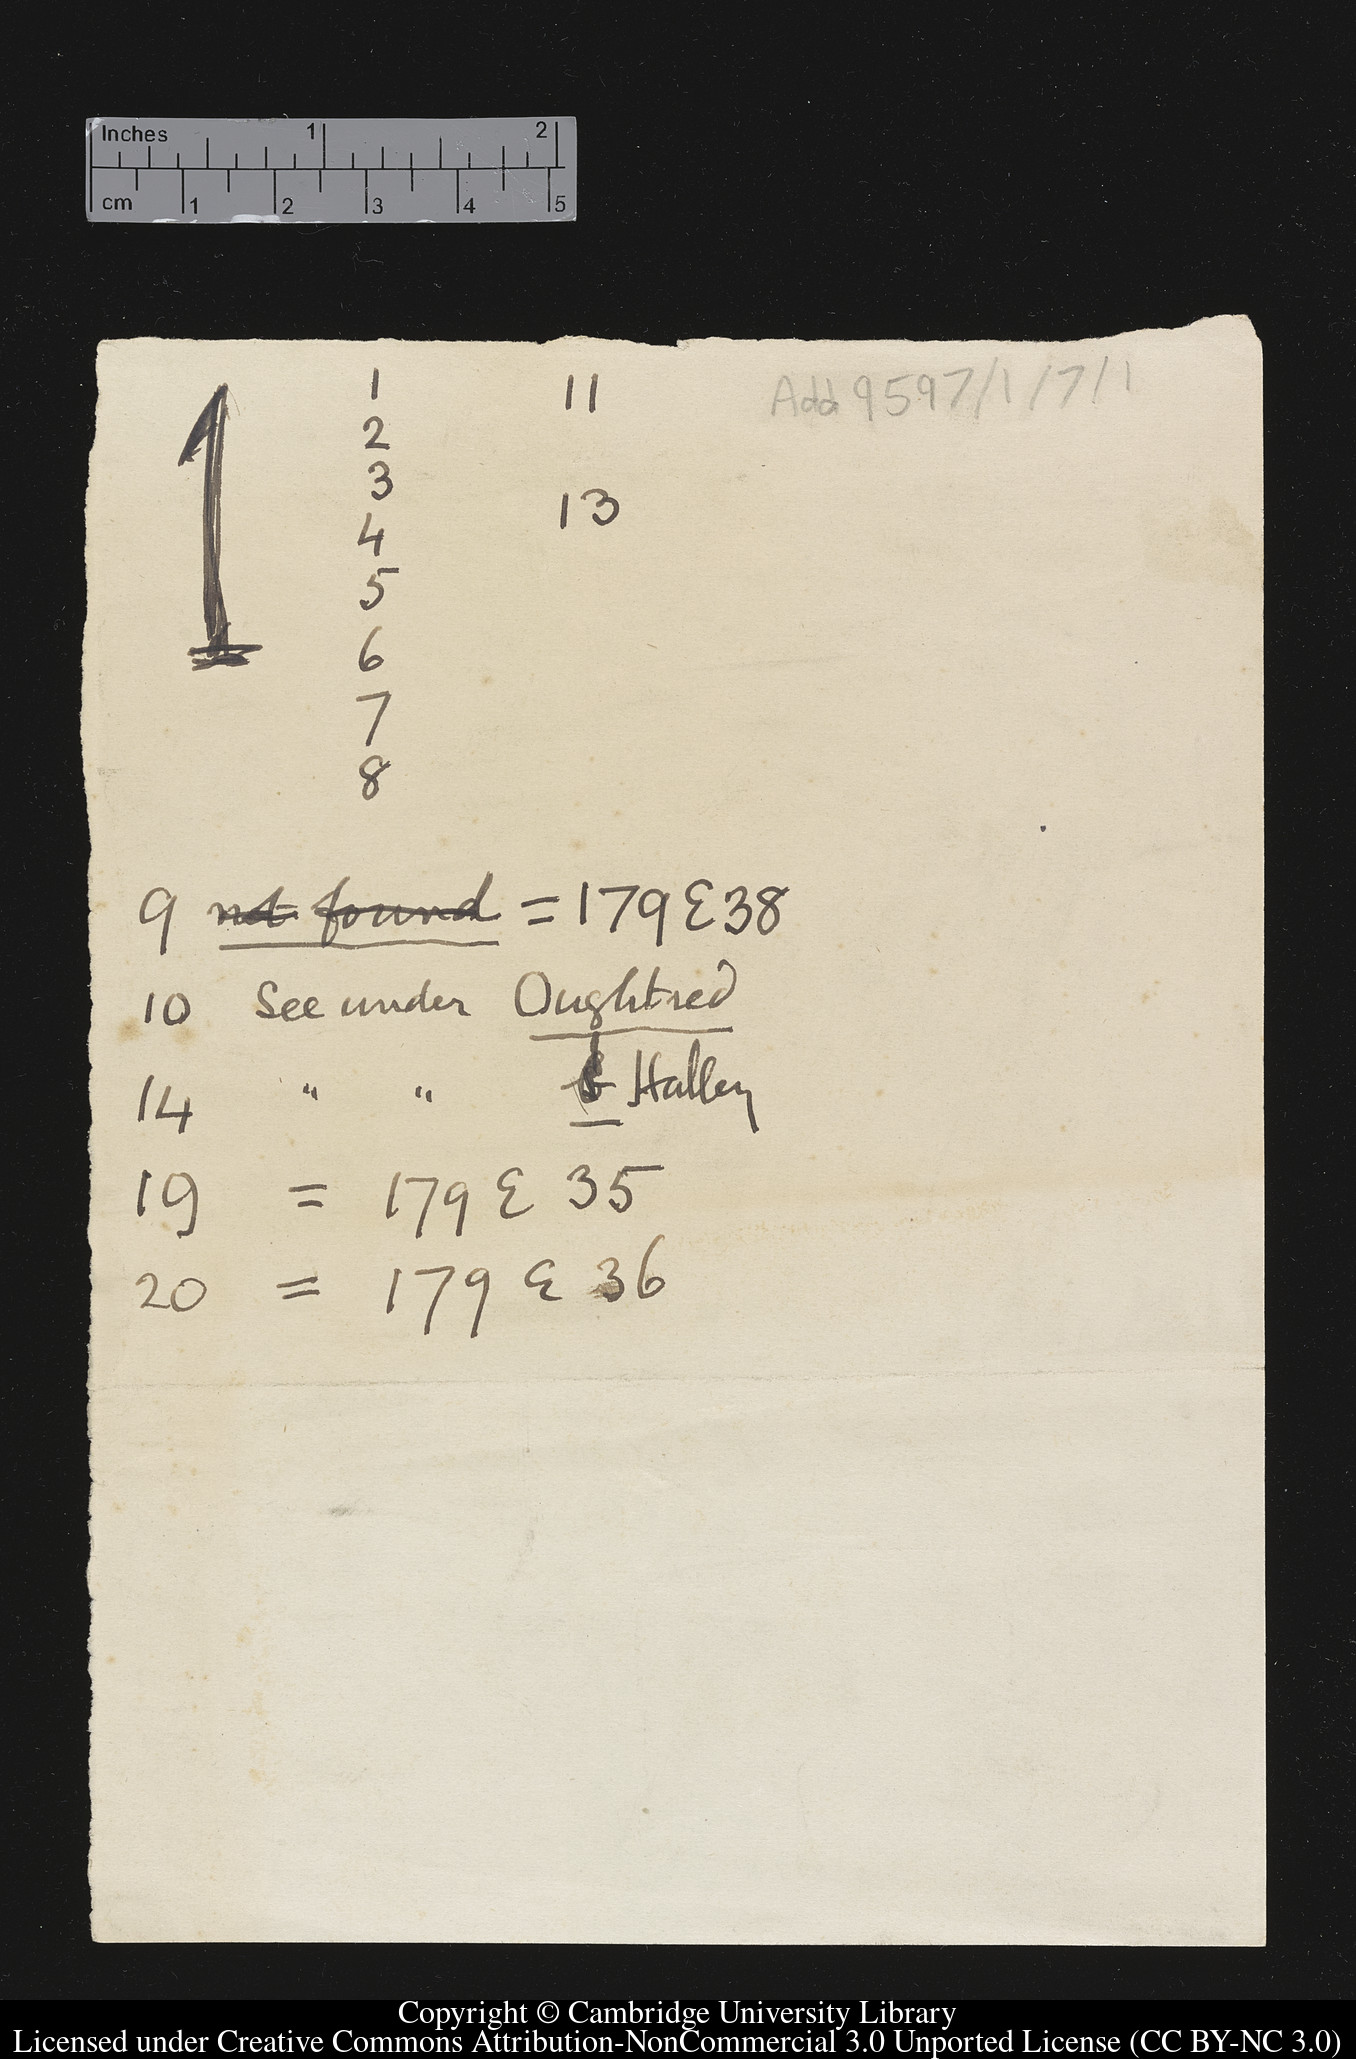 Turnbull&#39;s notes cross-referencing items in the collection to those in earlier catalogues